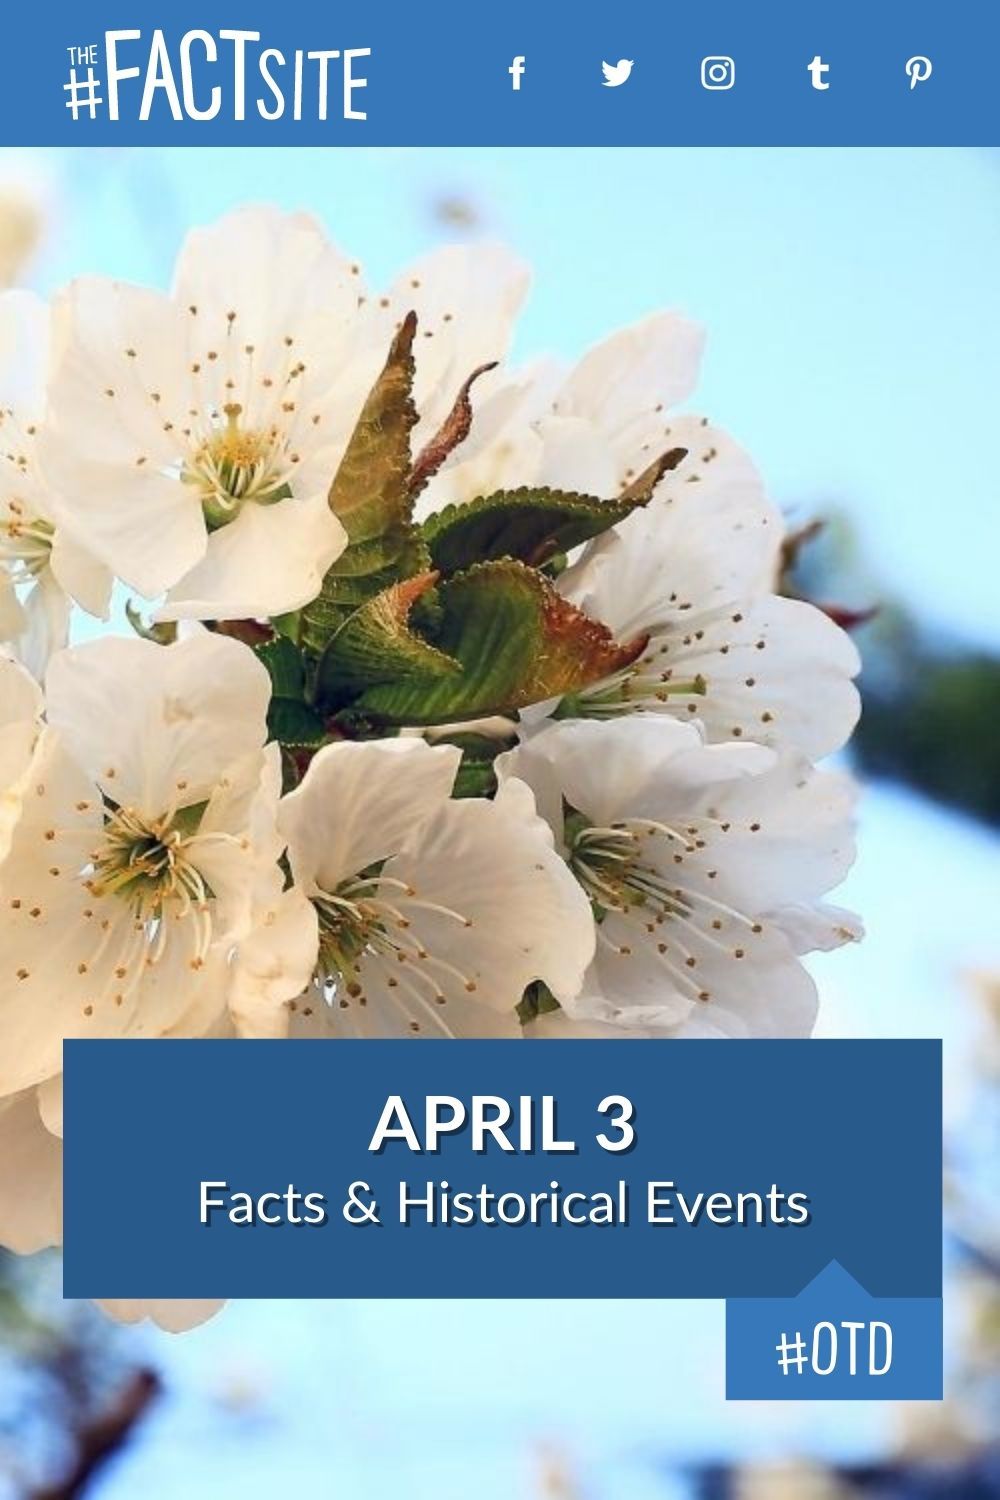 April 3: Facts & Historical Events On This Day